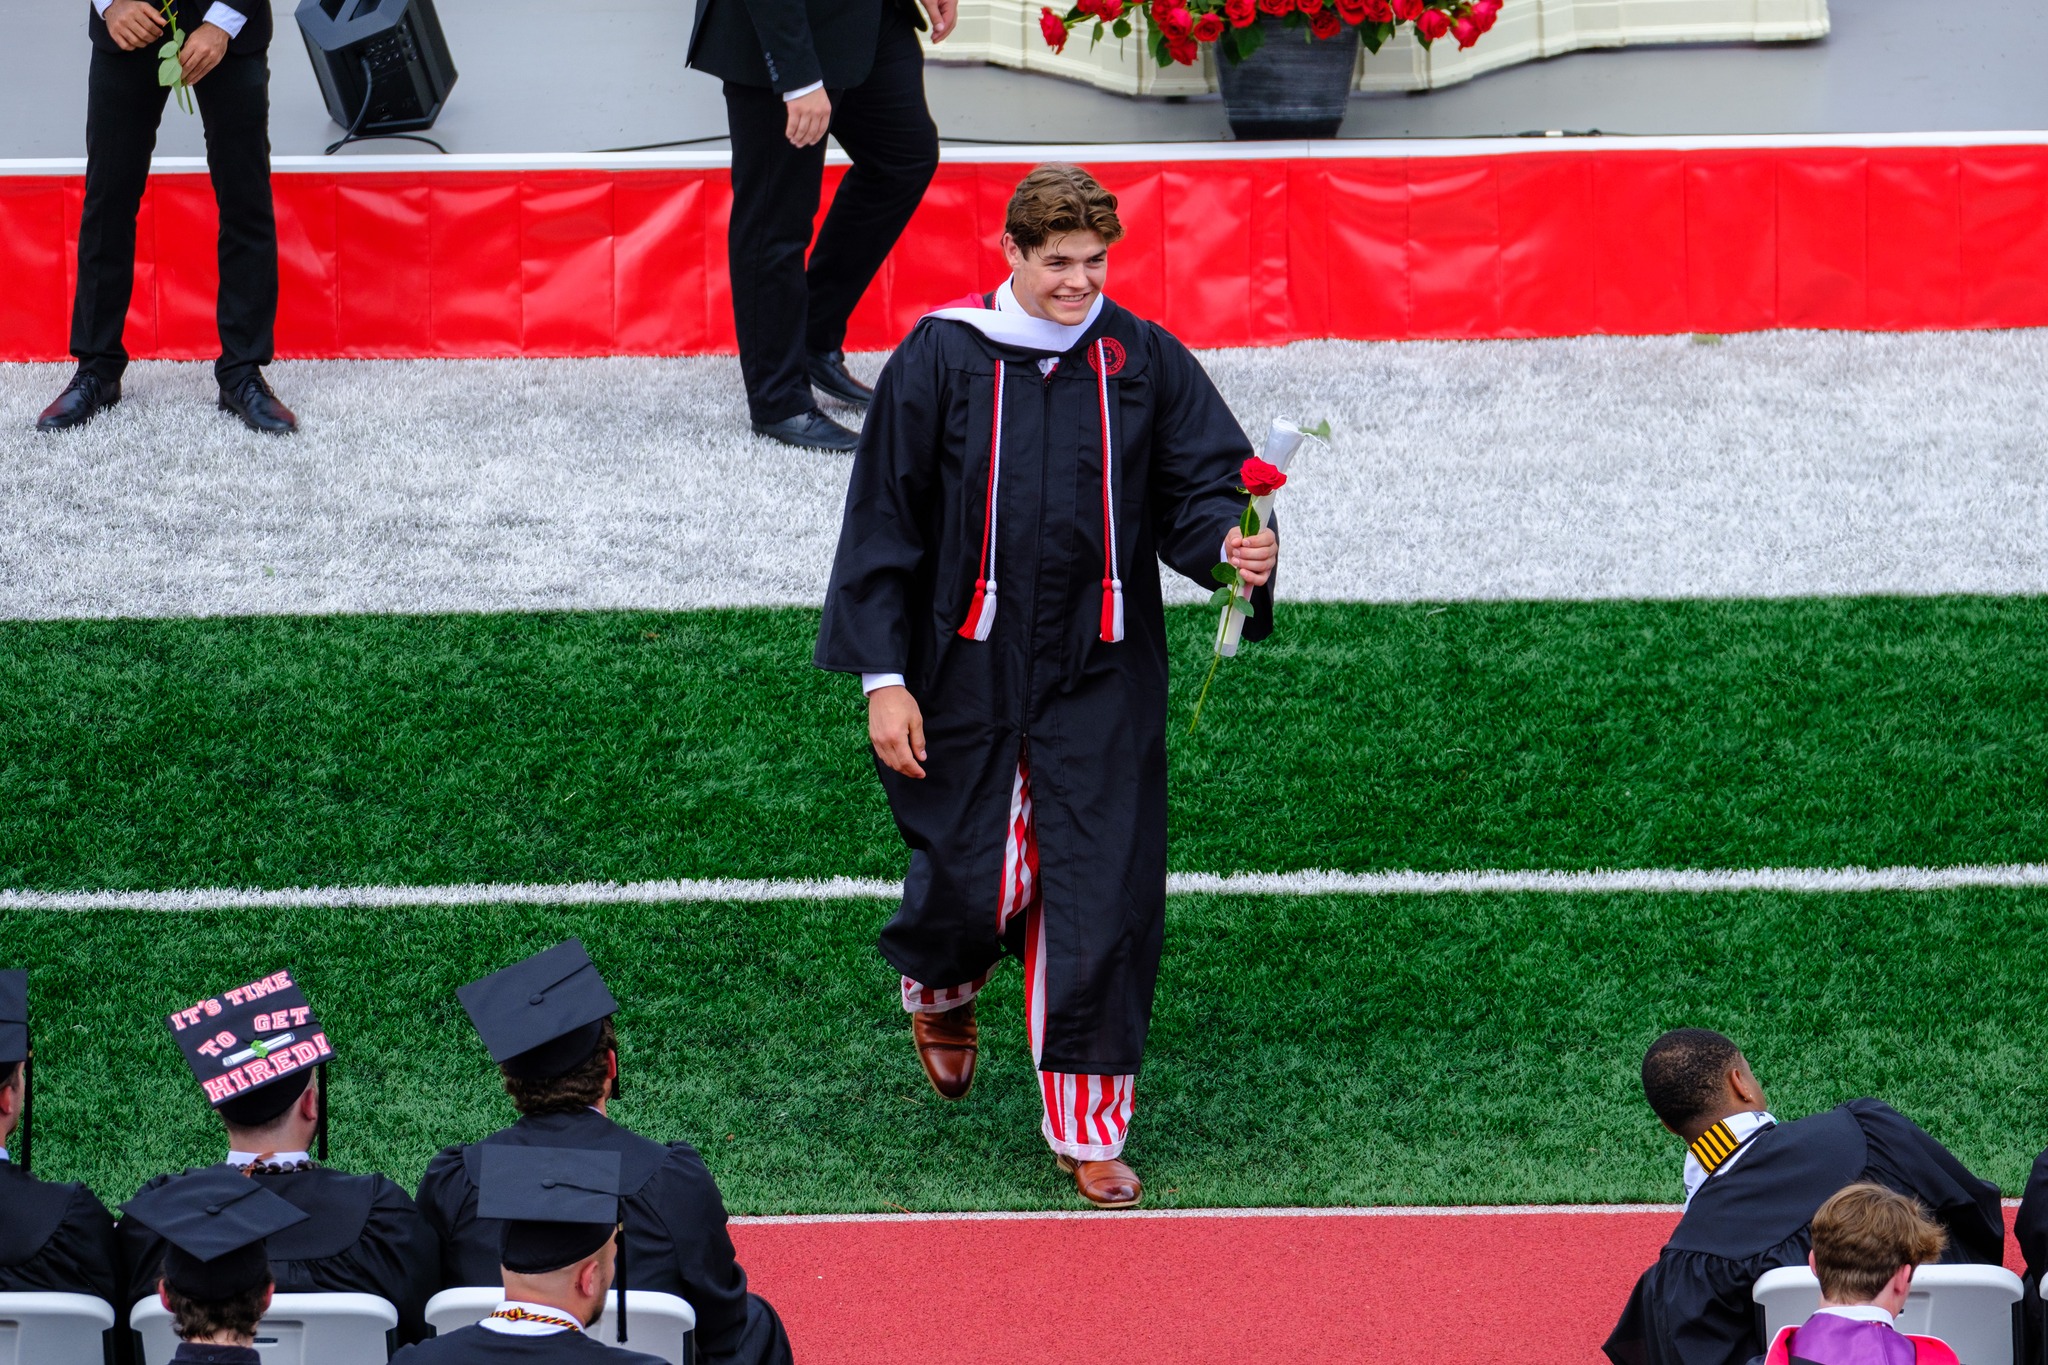 Jack Heldt ’23 is all smiles after receiving his Wabash diploma and rose.  